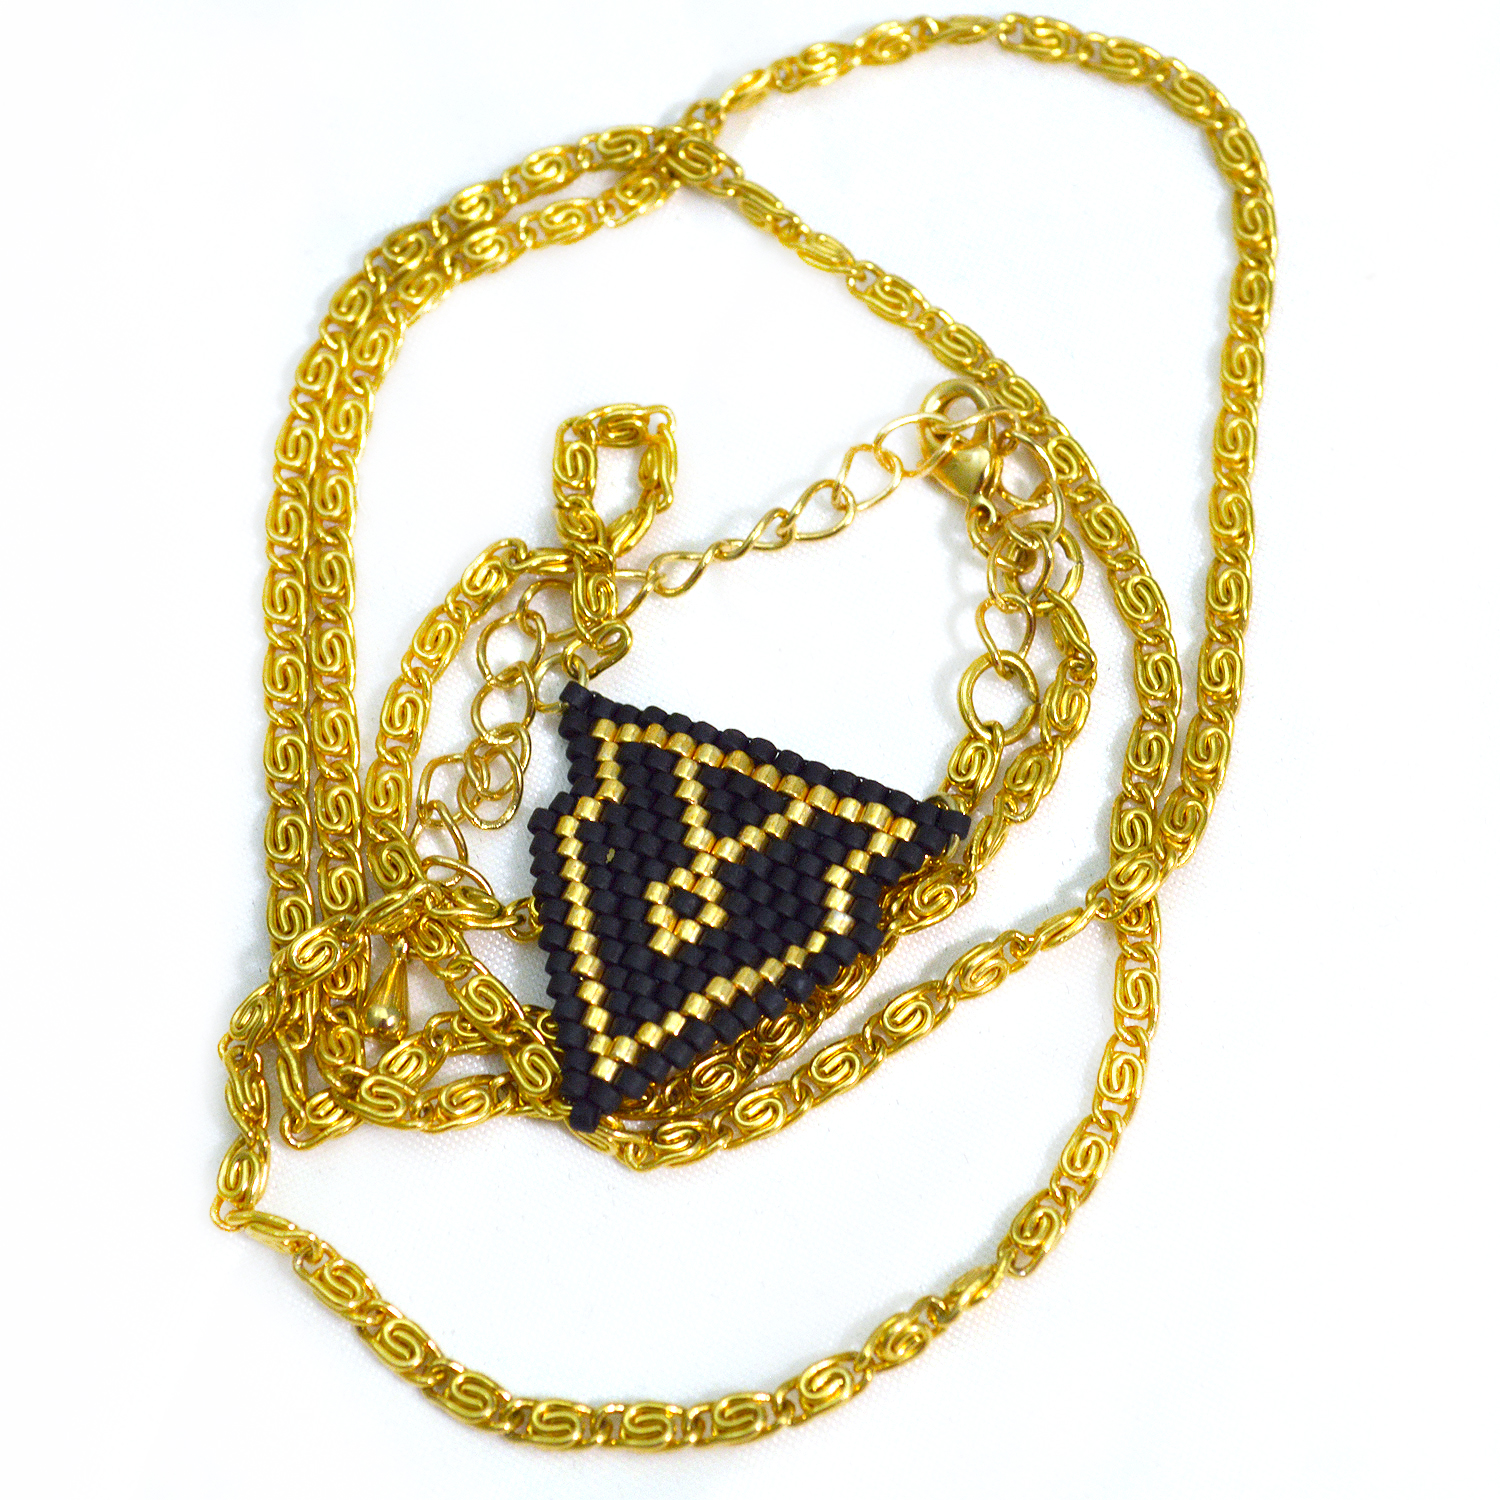 Black and Gold Necklace - Megan Petersen Jewelry